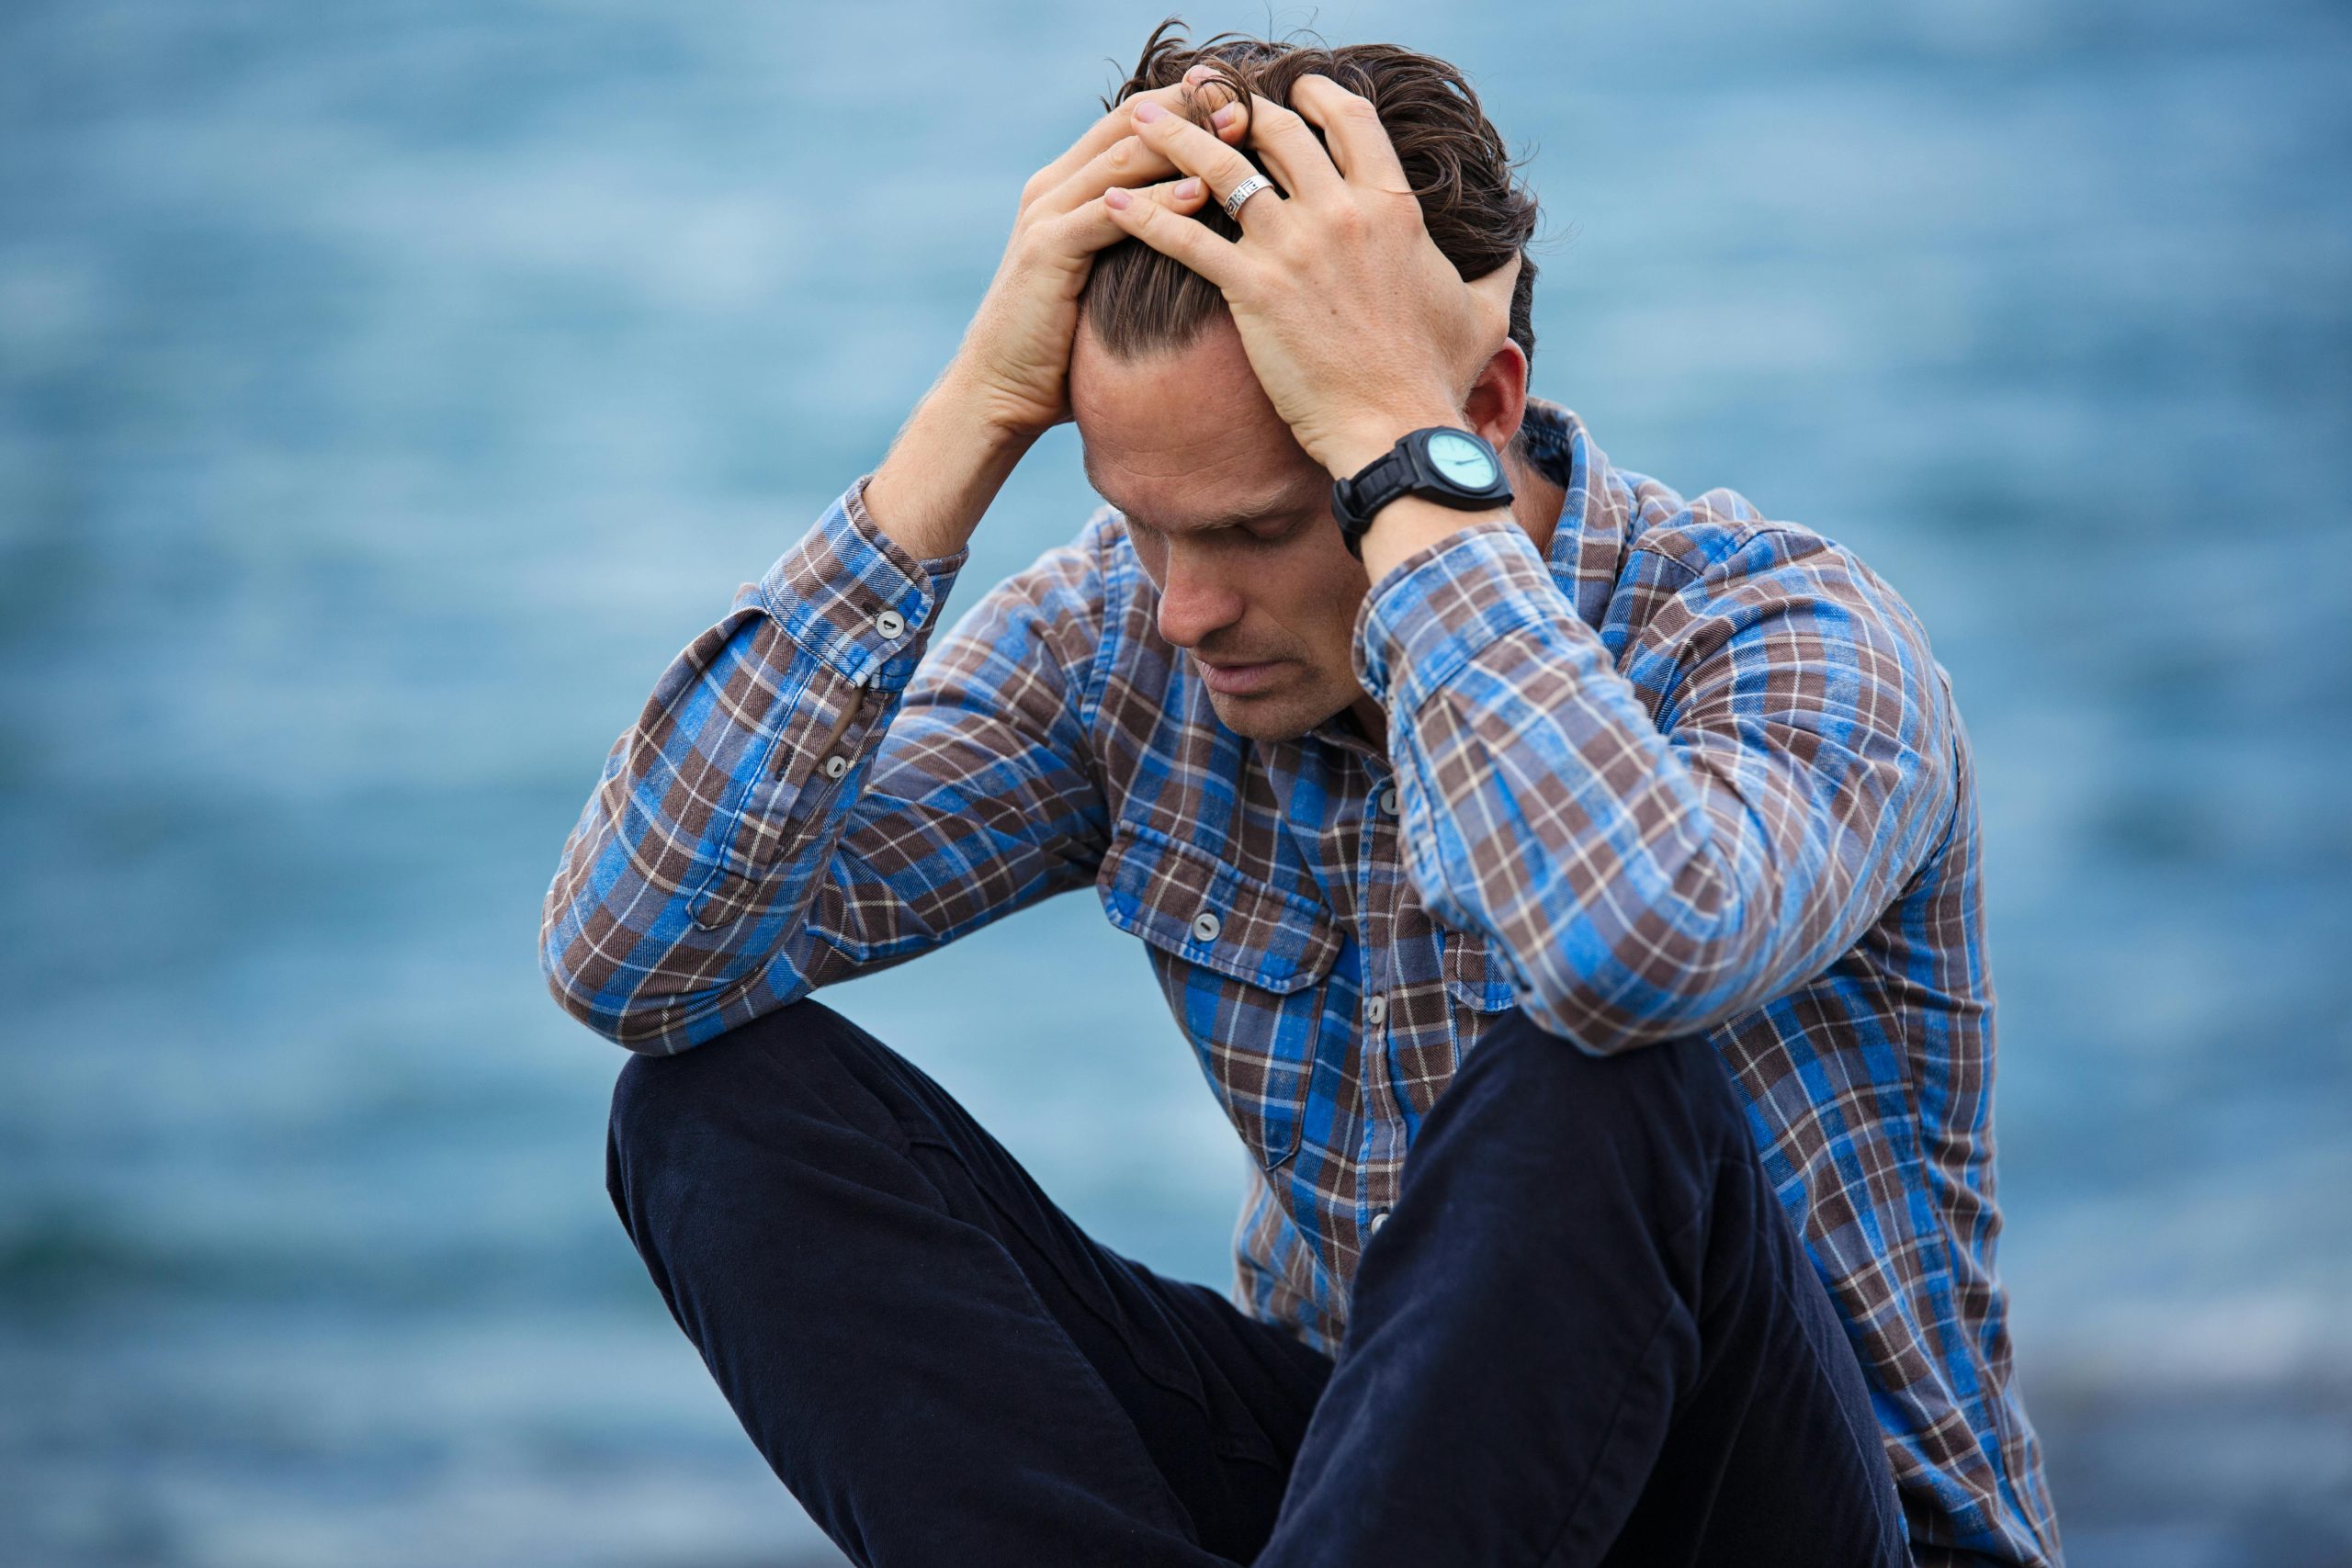 Signs you May be Struggling to Cope